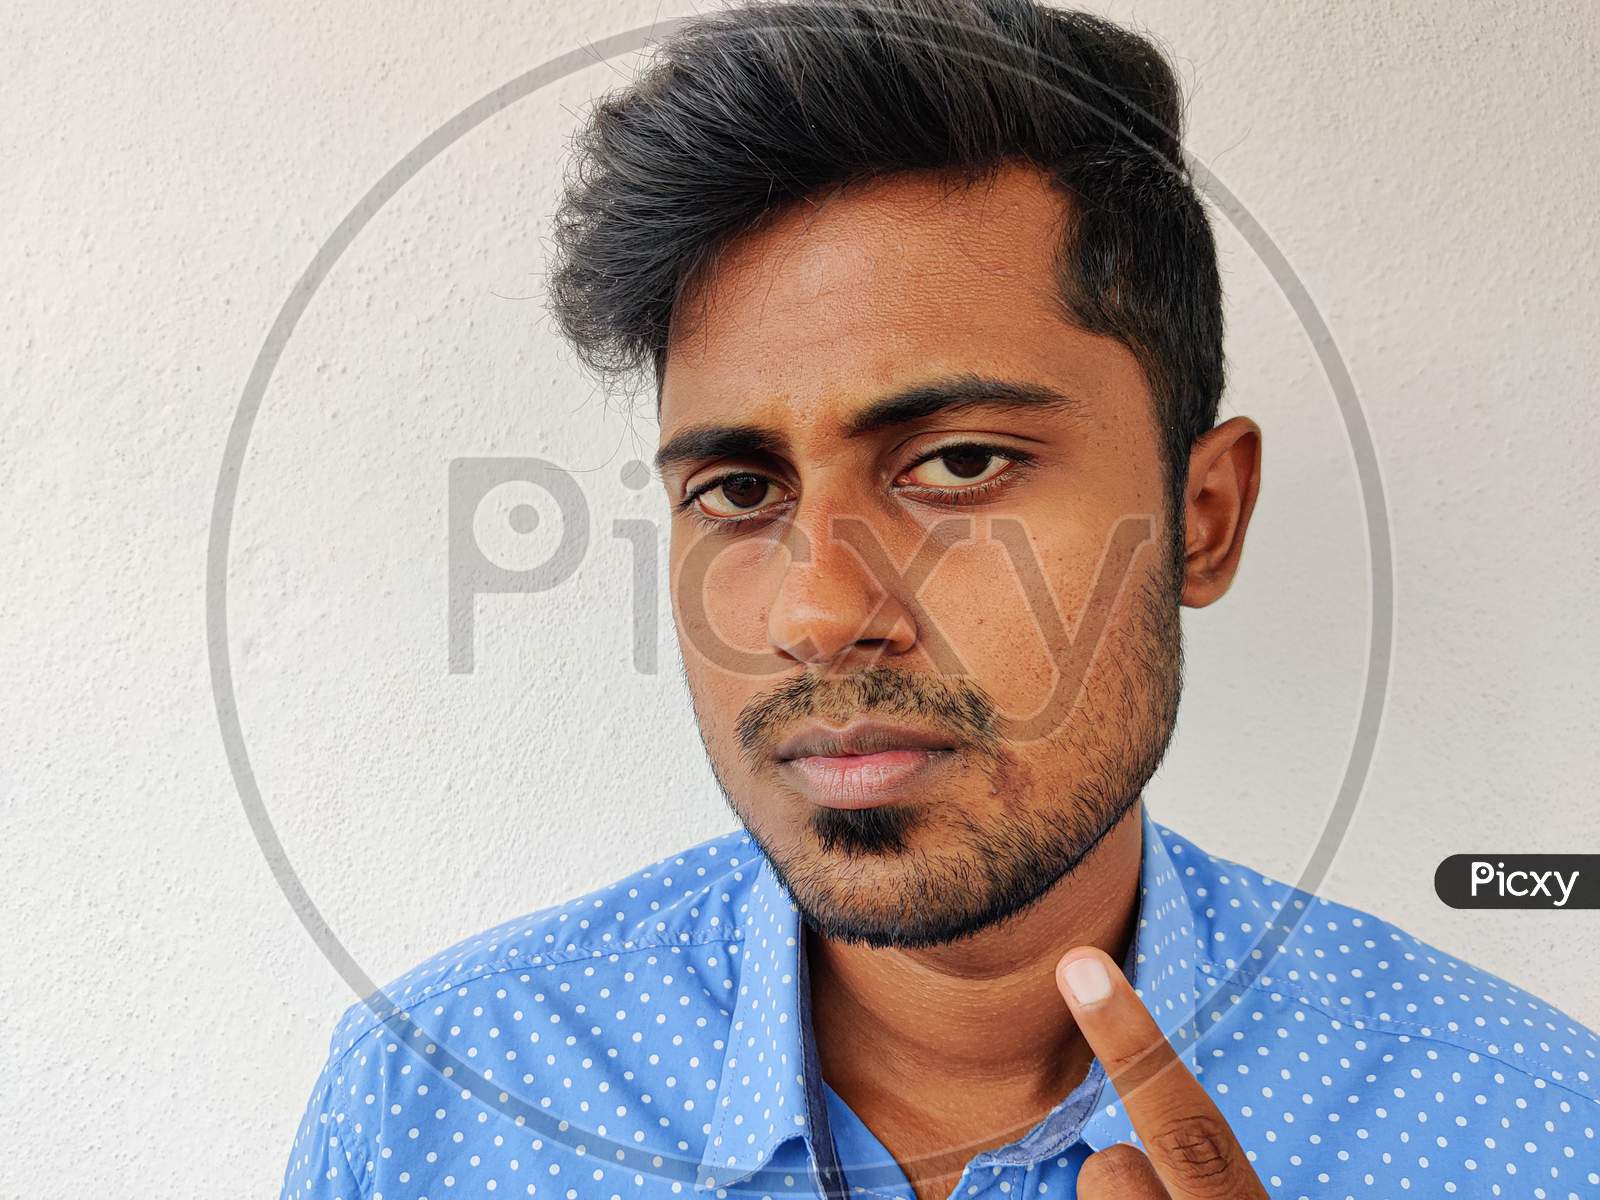 Portrait Of South Indian Man With A Scar In His Face. Real Face, Real Body. Skin Conditions.